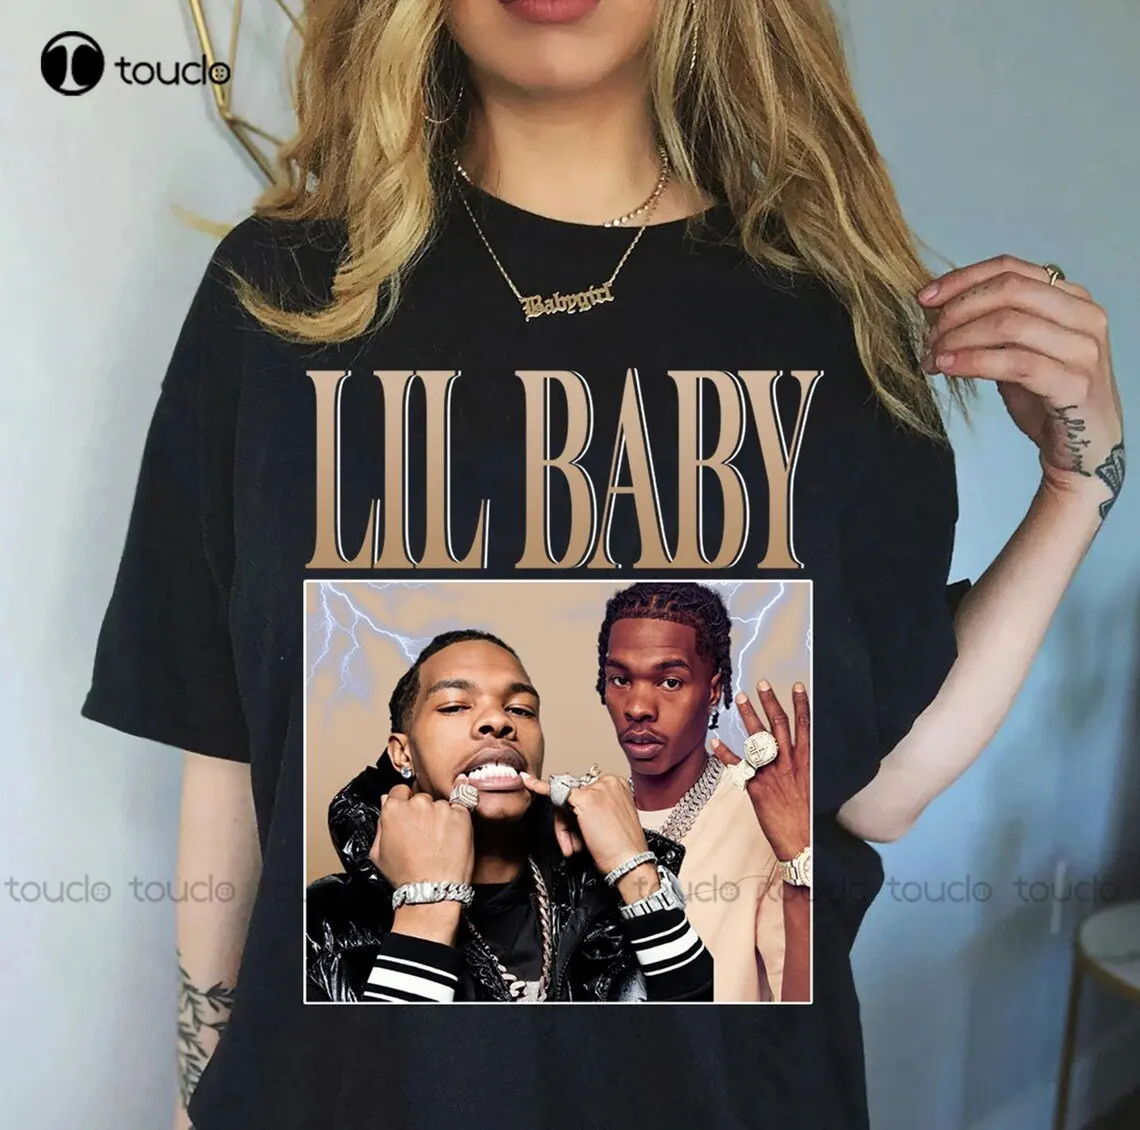 

Intage Lil Baby Shirt Lil Baby Rapper Tshirt Lil Baby Merch Lil Baby Graphic Tee Lil Baby Sweatshirt Gift For Her Gift For Him